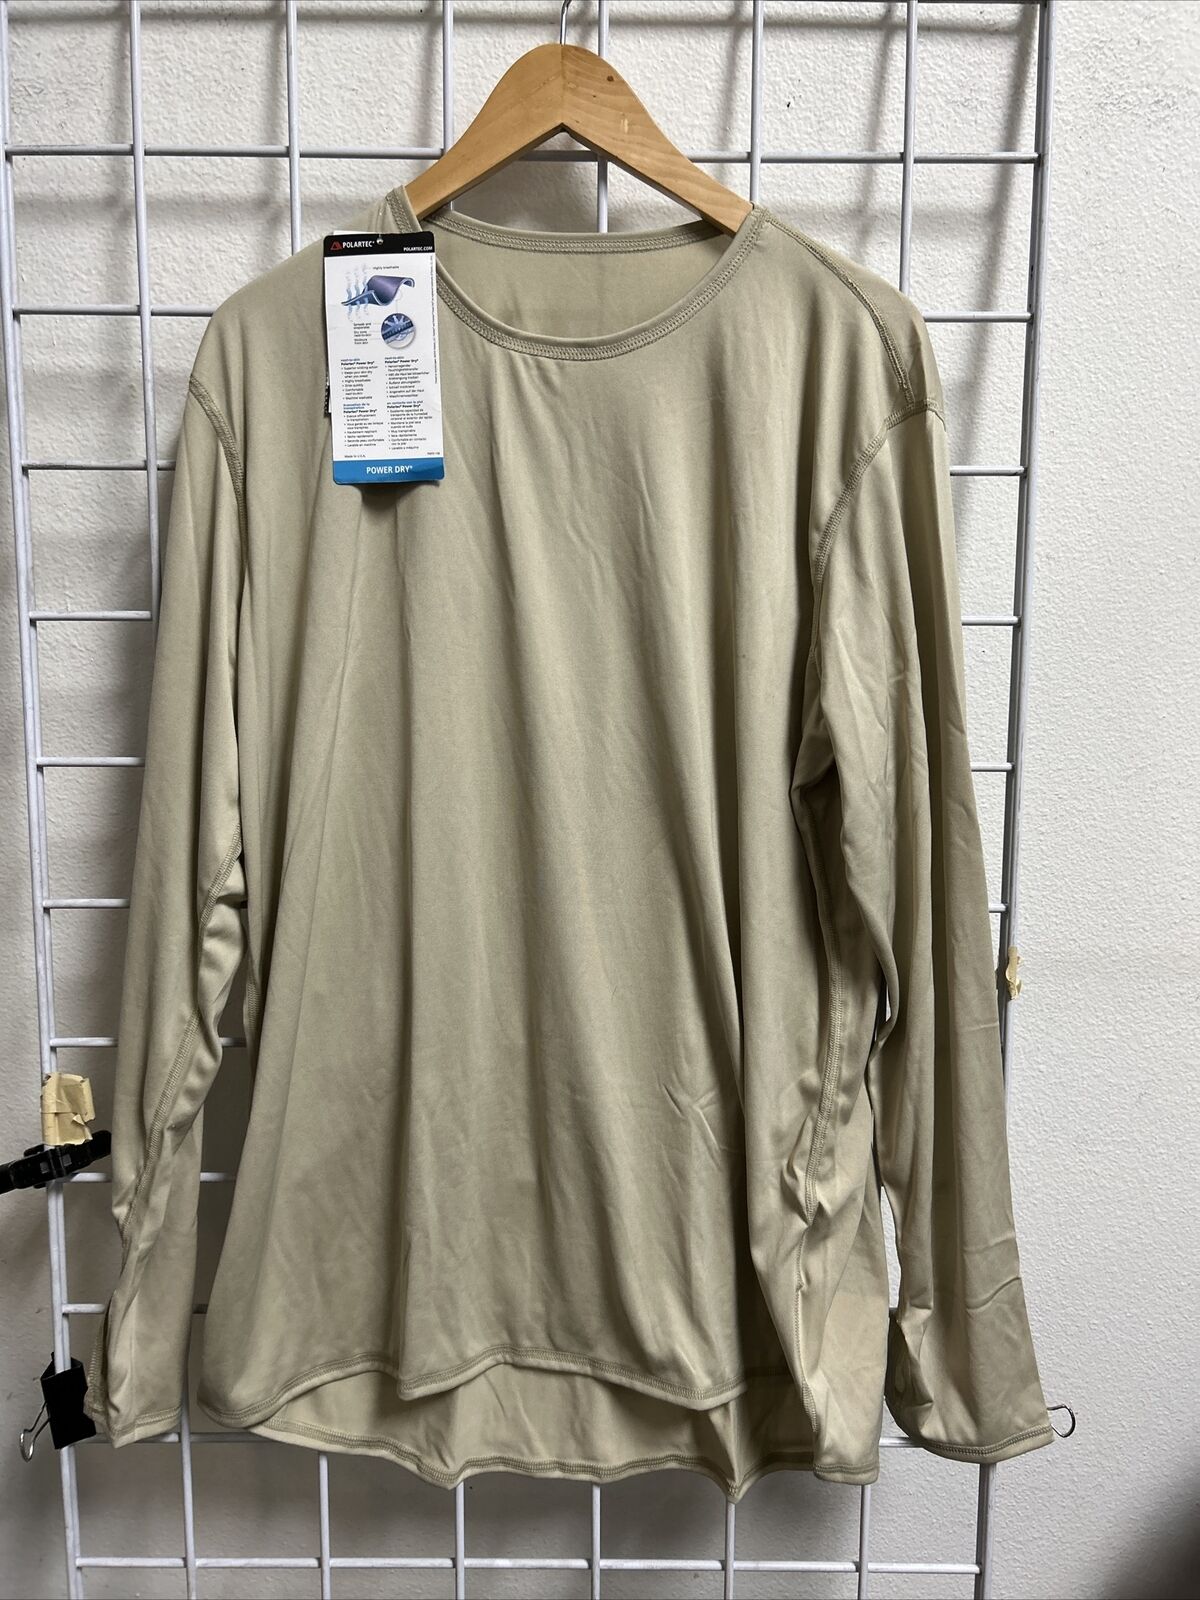 MILLIKEN COLD WEATHER SILK TOP (LARGE REGULAR ) NEW WITH TAGS